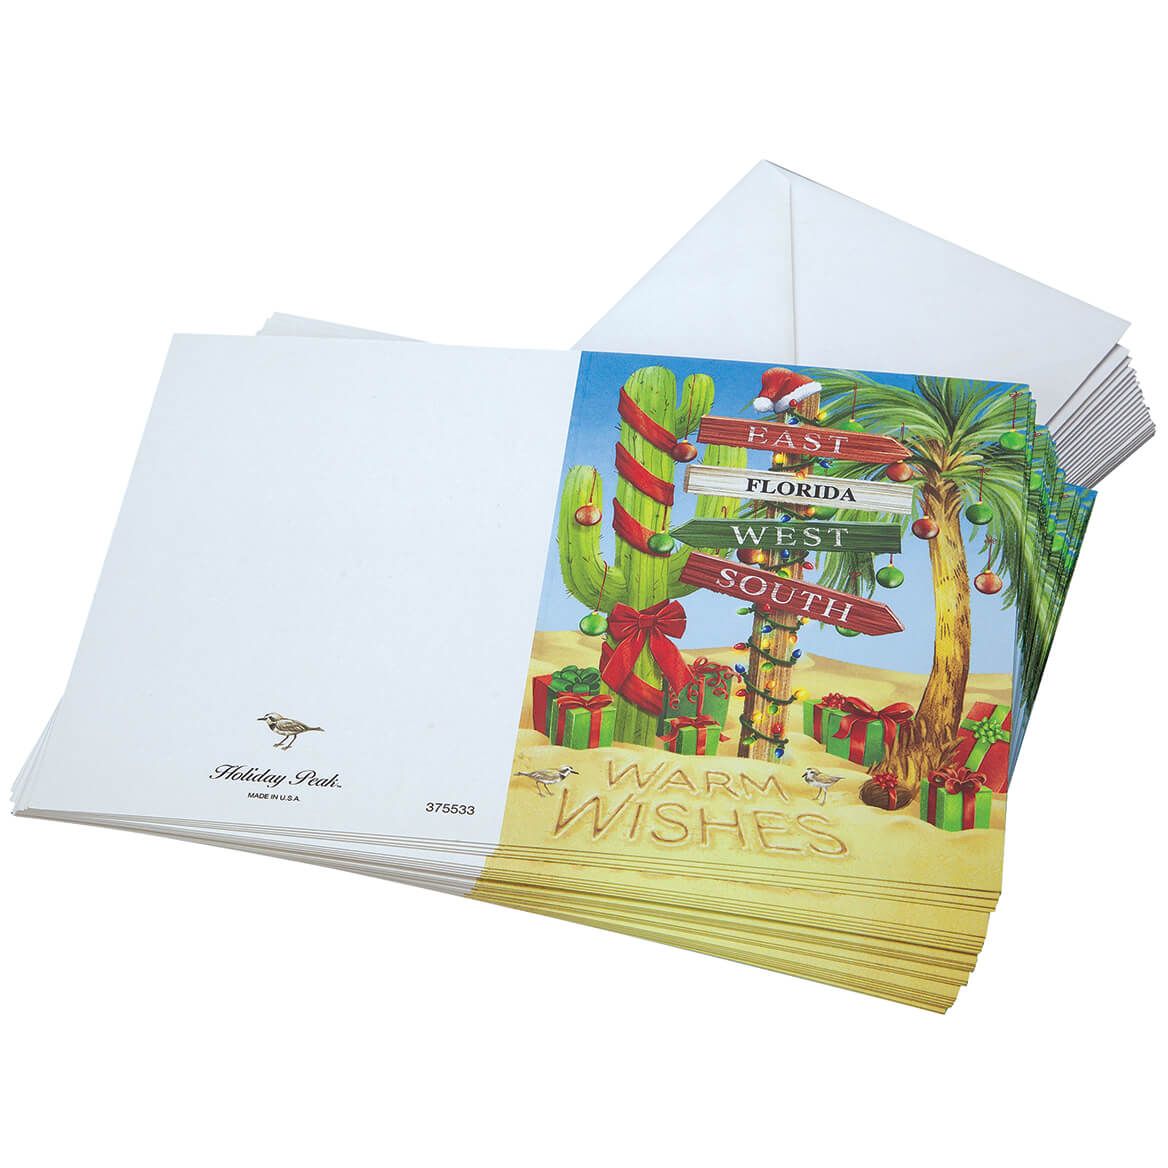 Personalized Warm Wishes Christmas Cards, Set of 20 + '-' + 375533